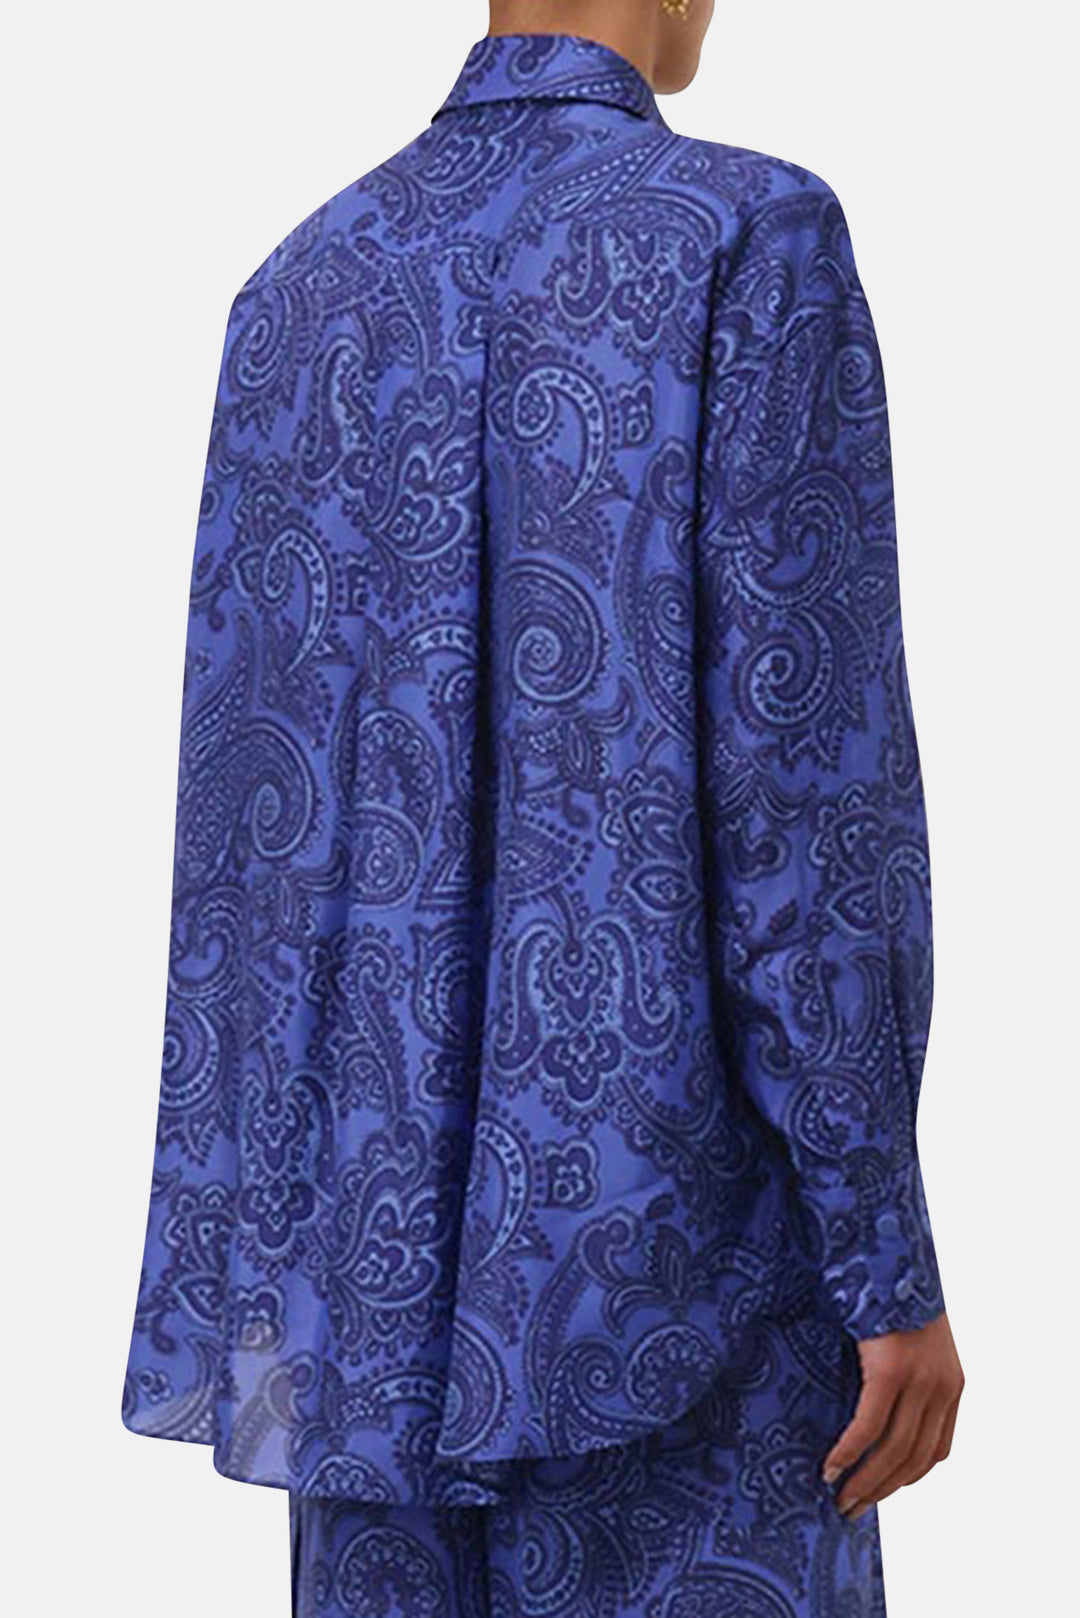 Ottie Relaxed Shirt Blue Paisley